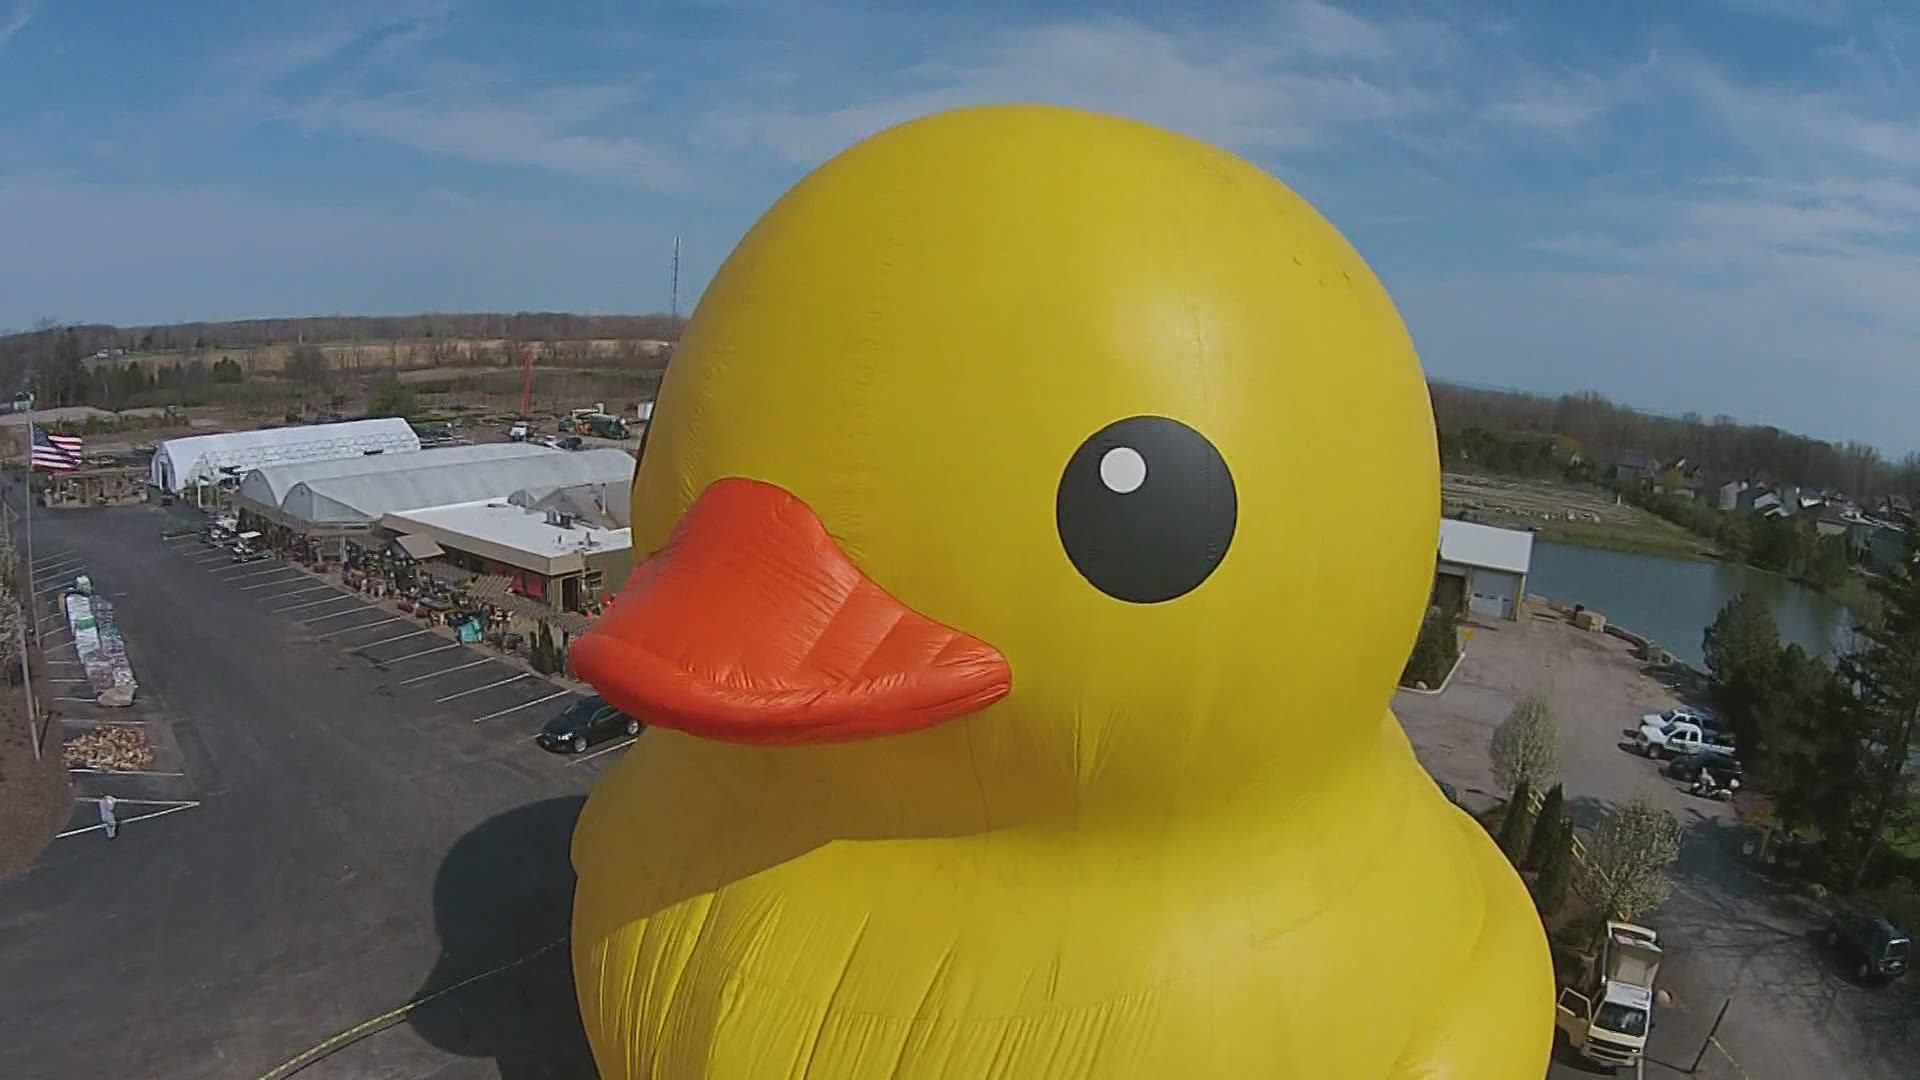 The World's Largest Rubber Duck is coming to Fort Worth